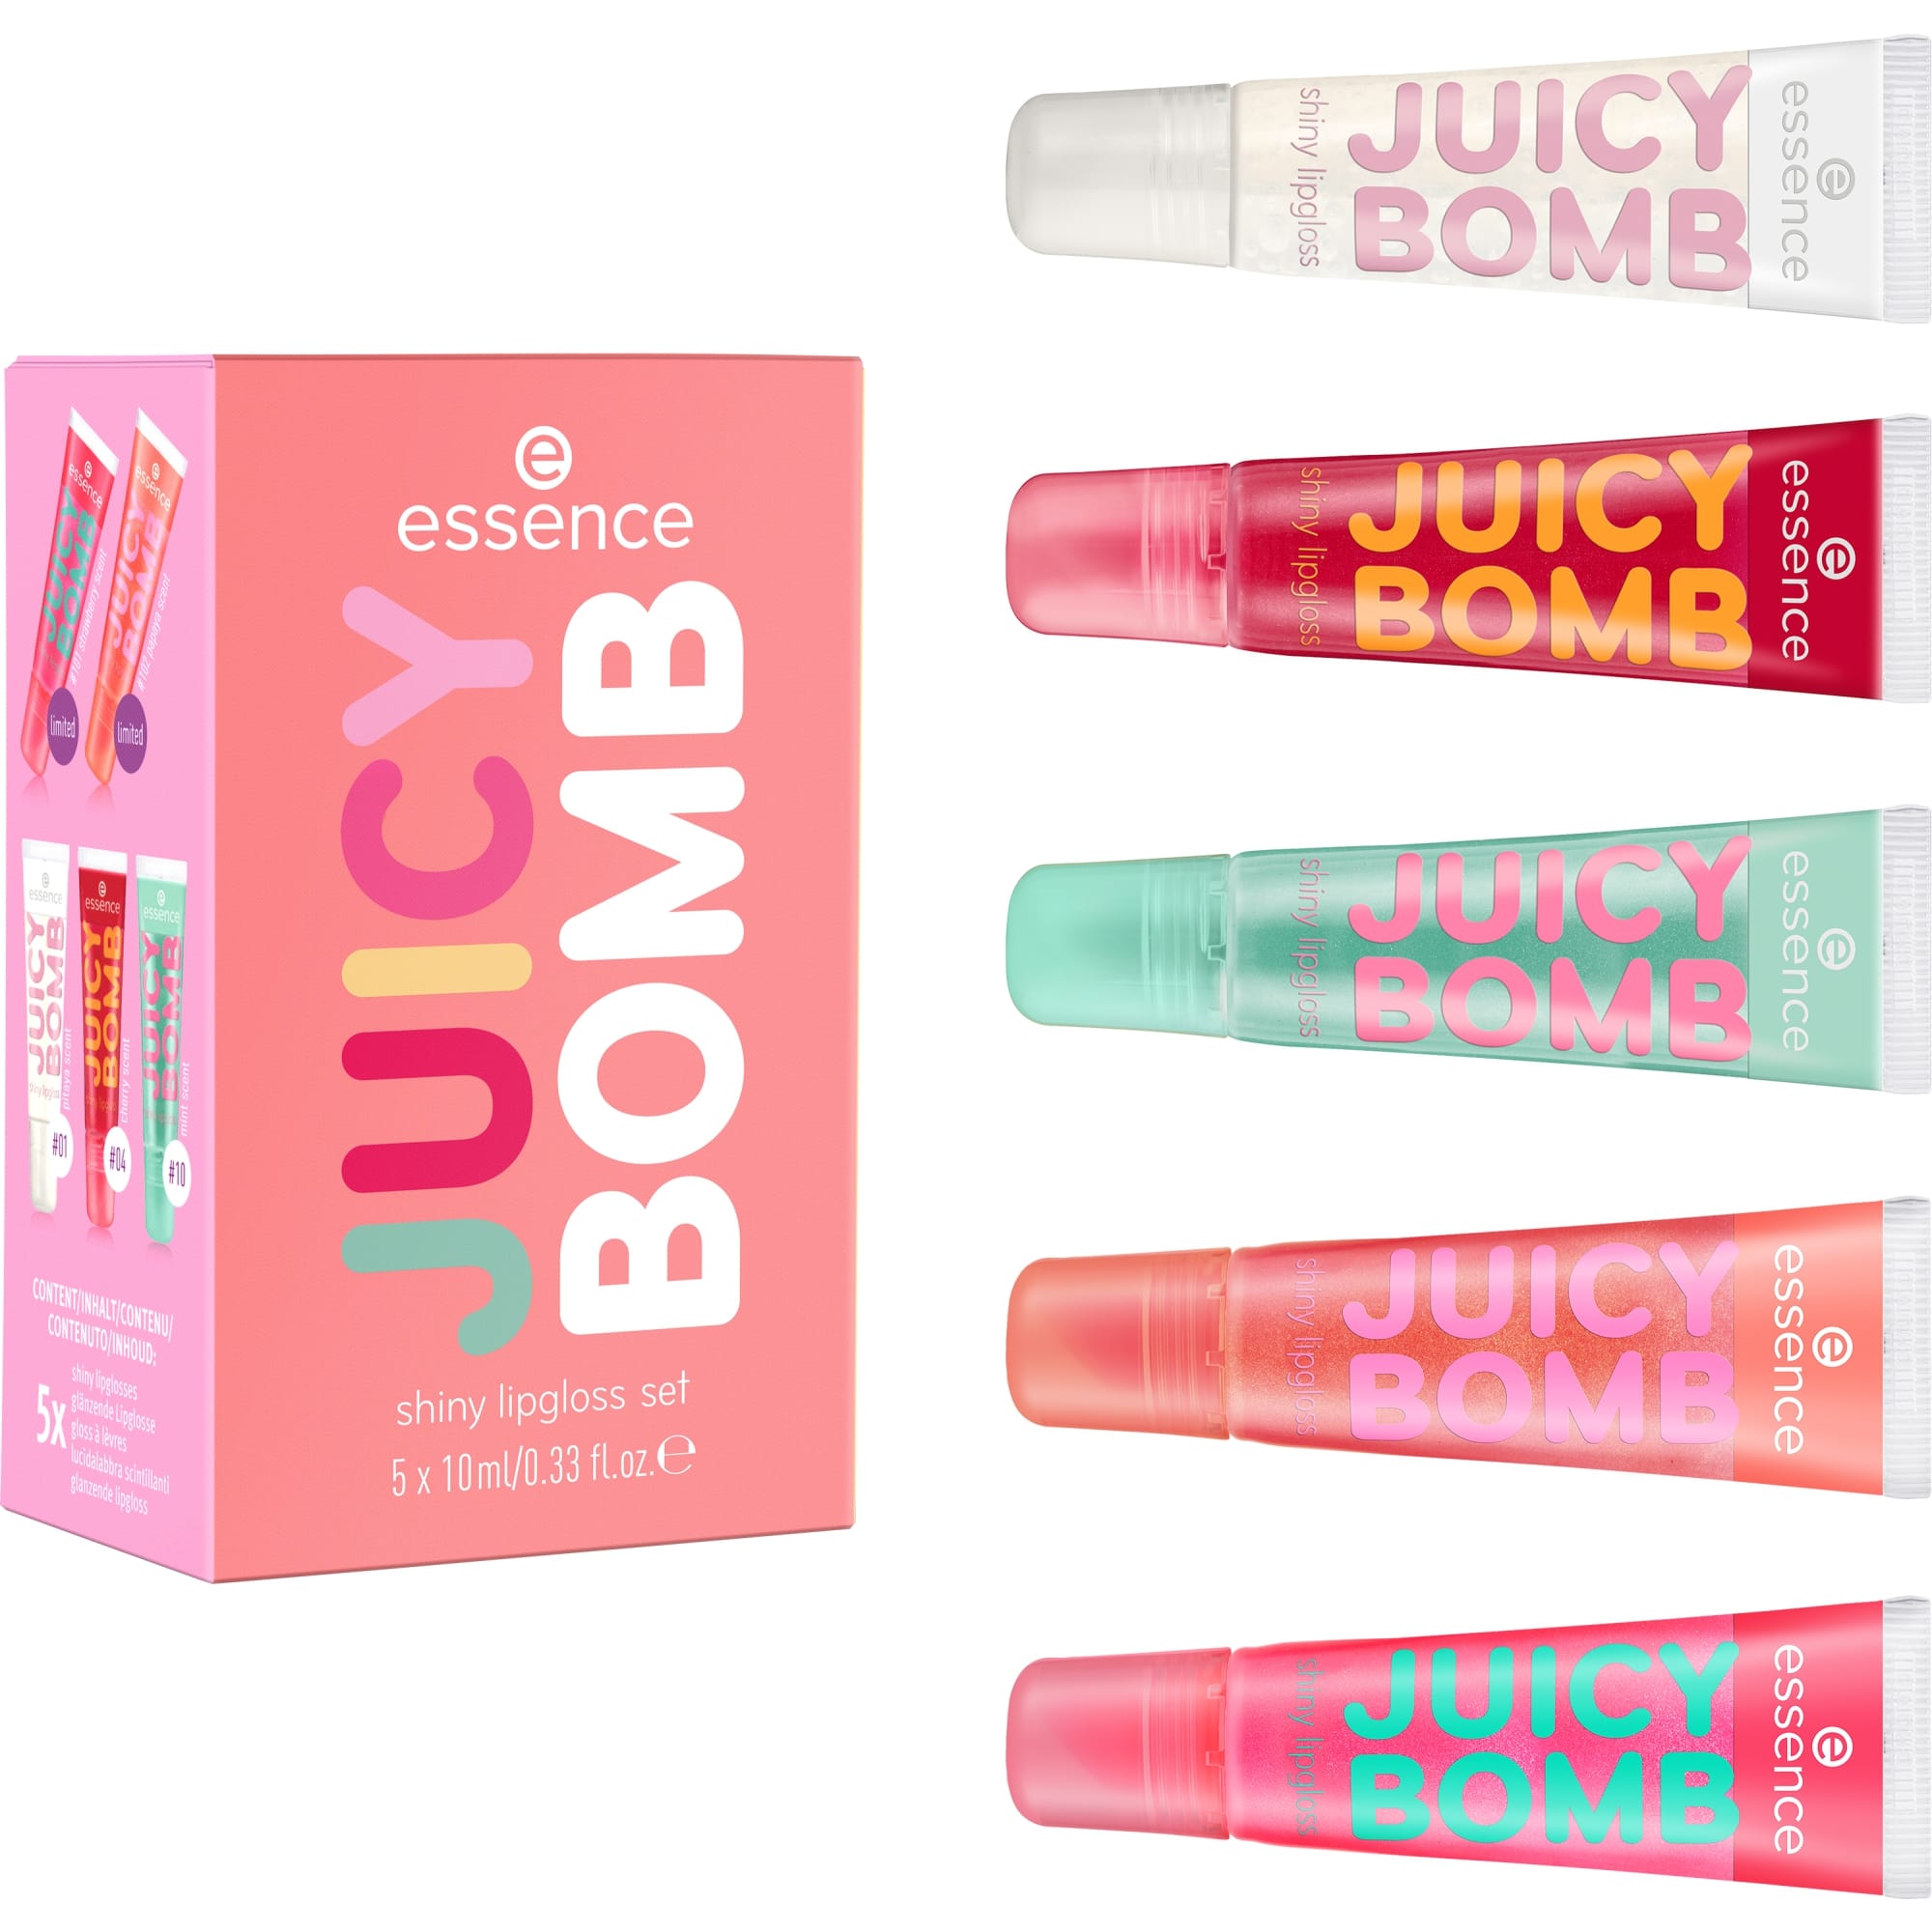 Essence Juicy Bomb Shiny Lipgloss set 01 Squeeze The Day